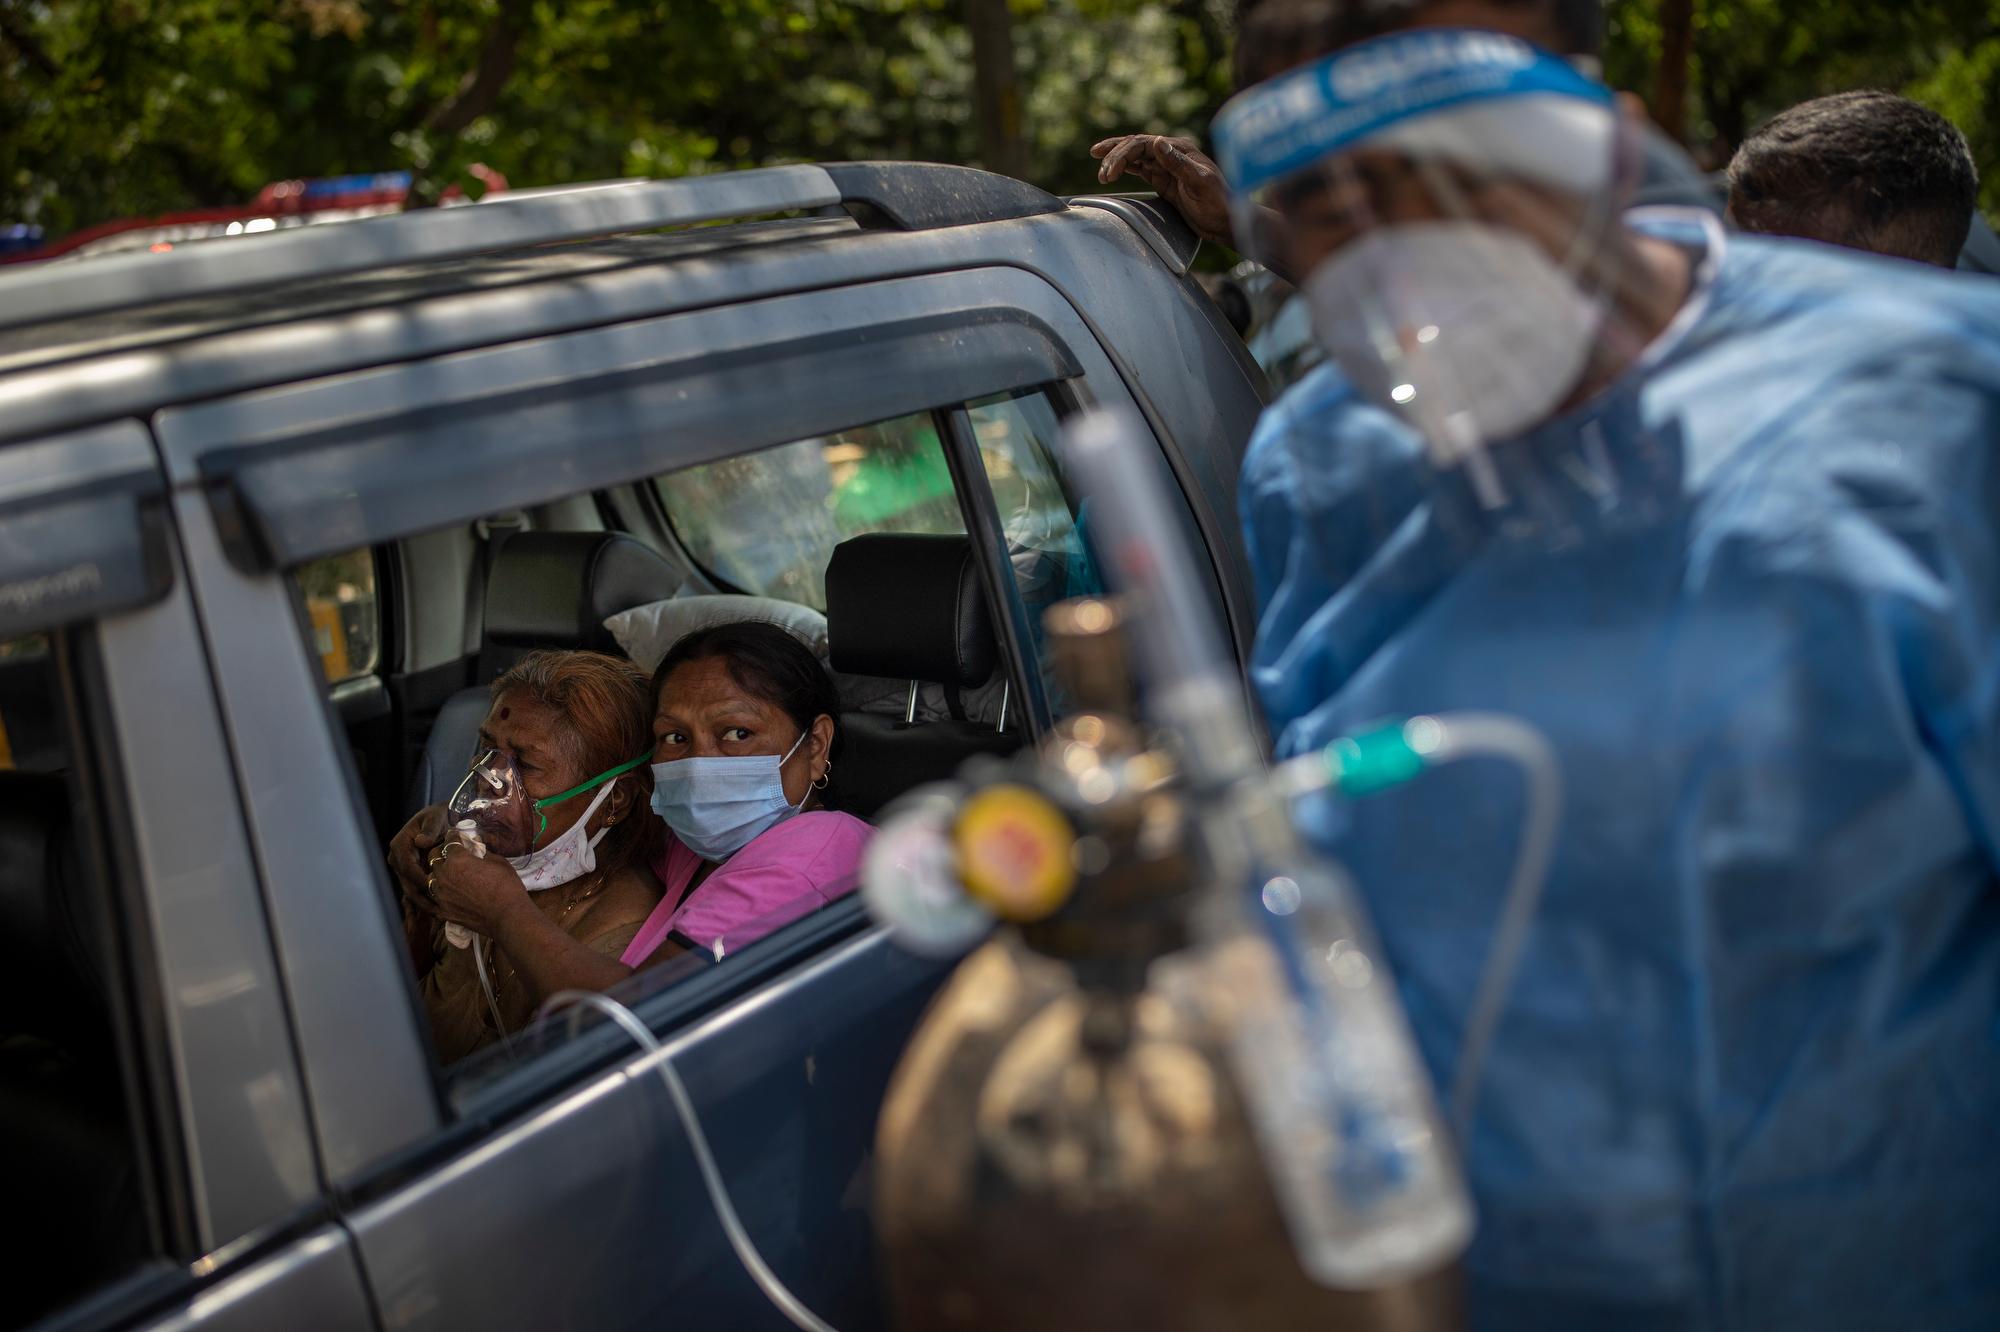 A patient in a car receives oxygen provided by a Gurdwara, a Sikh place of worship, in New Delhi, India, on April 24, 2021. India’s health system has been overwhelmed by the coronavirus pandemic, leaving patients desperate for oxygen and other supplies. (AP Photo/Altaf Qadri)